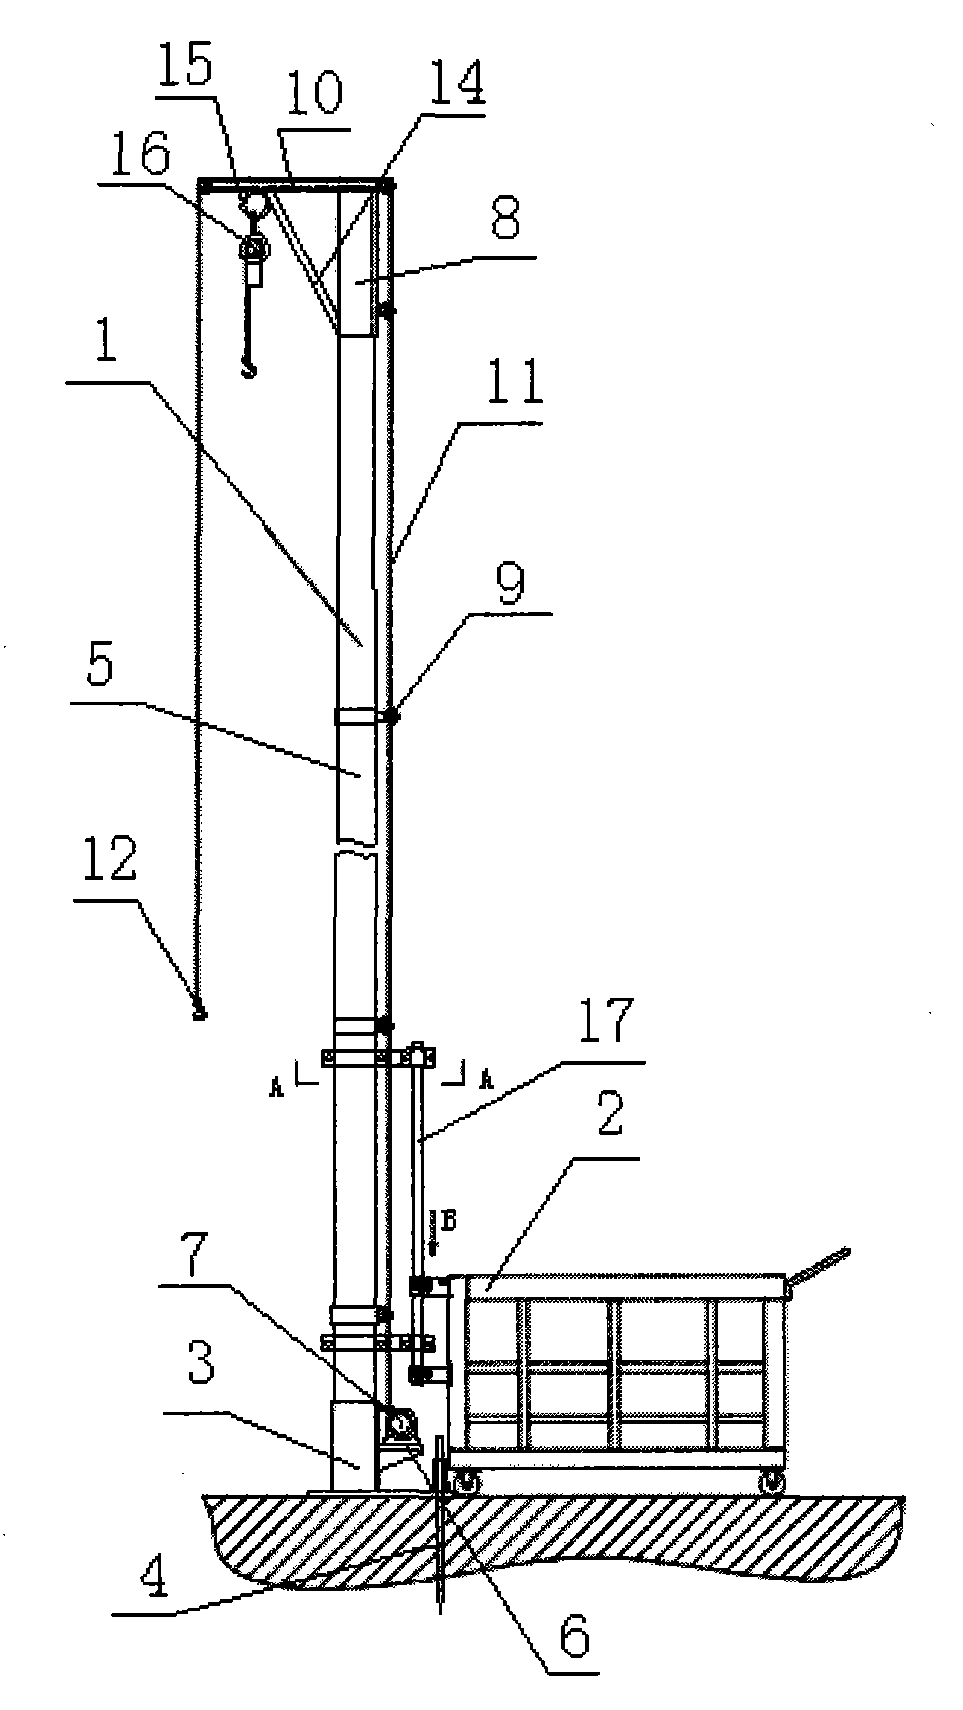 Small interval dual-purpose hoisting device